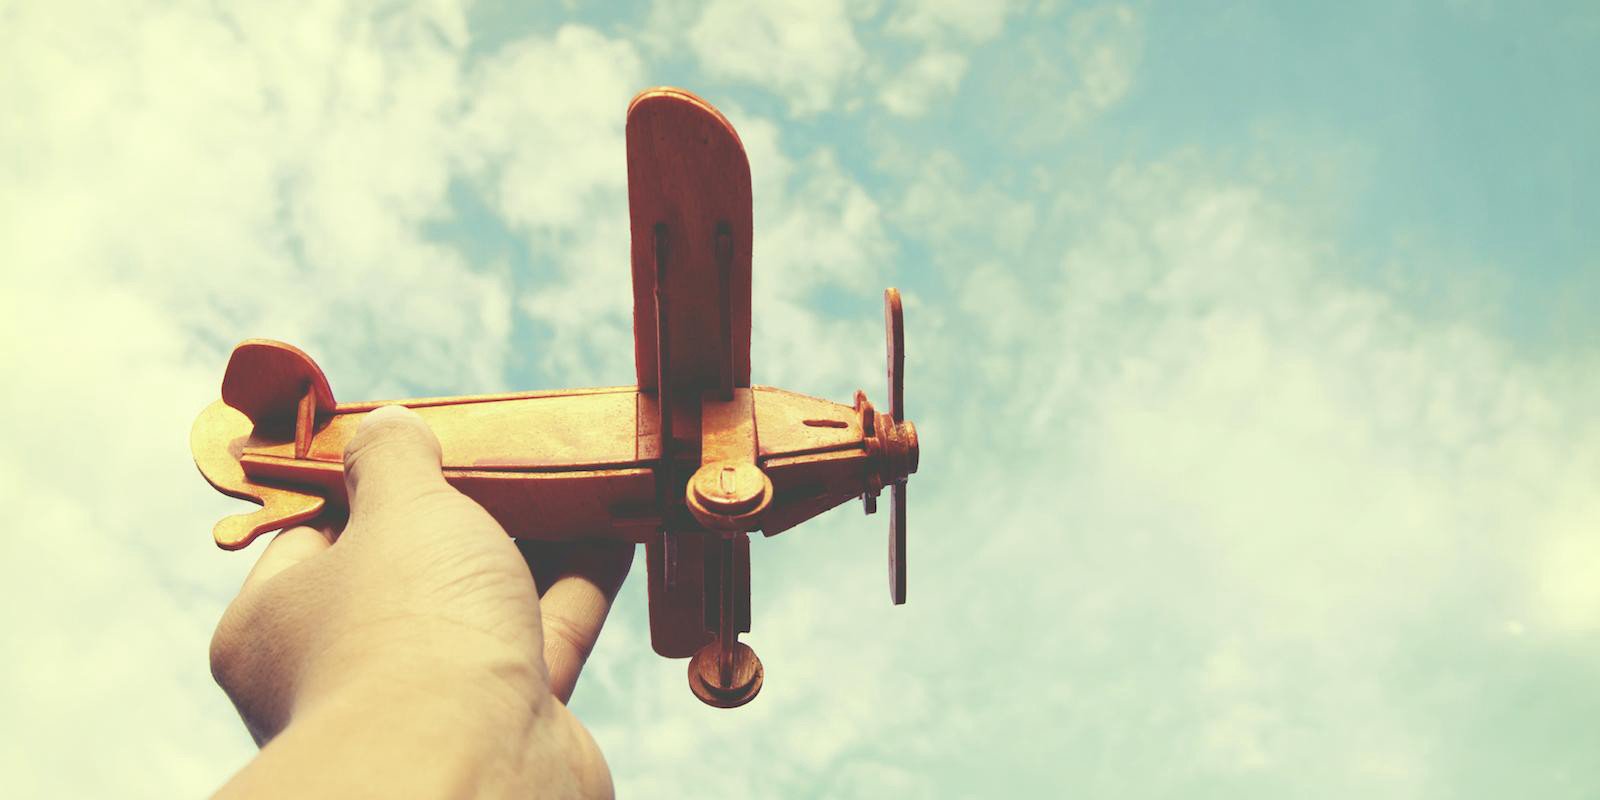 Person's hand flying a wooden prop plane against a lightly cloudy blue sky